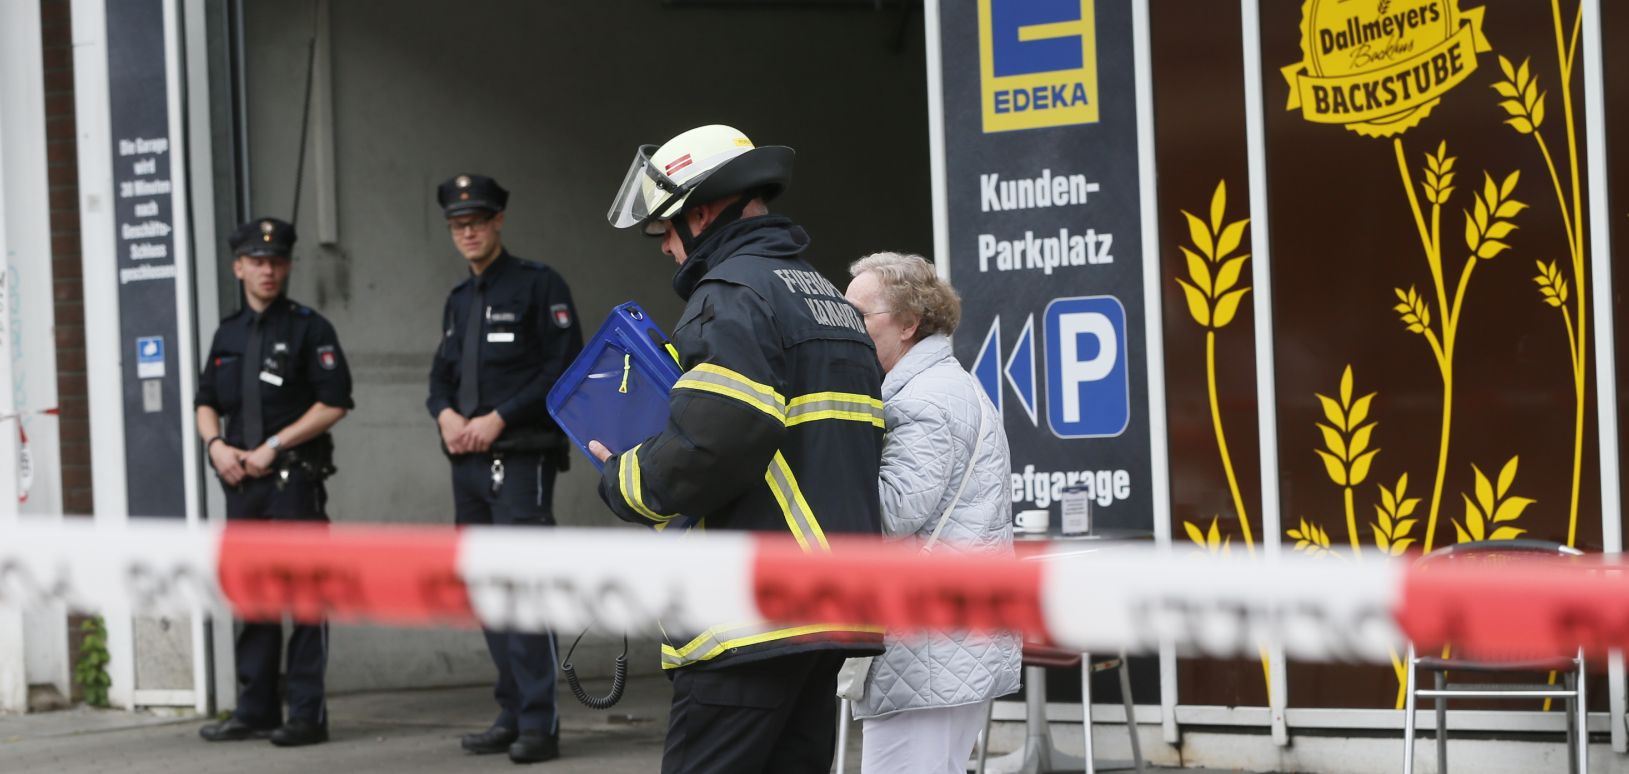 An elderly woman is accompanied by a firefighter after a knife attack at a supermarket in Hamburg, Germany, 28 July 2017. A man killed another person and injured several during a supermarket robbery in the district of Barmbek in Hamburg on 28 July. The suspect was arrested, the police informed on Twitter. Photo: Paul Weidenbaum/dpa